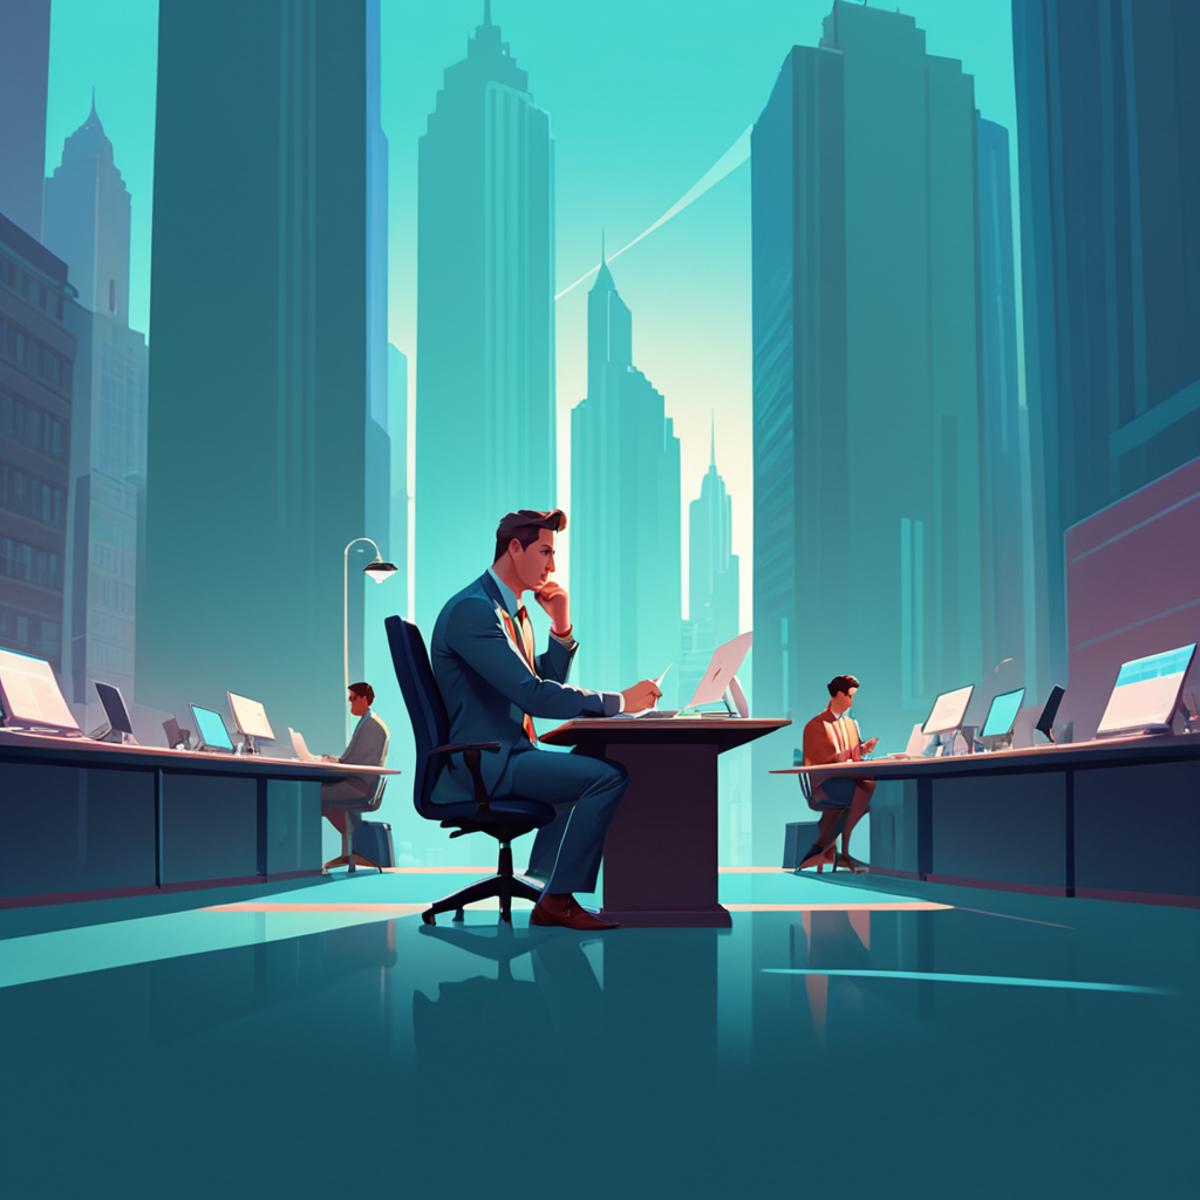 FF Style: James Gilleard - Modern Illustration Art image by idle